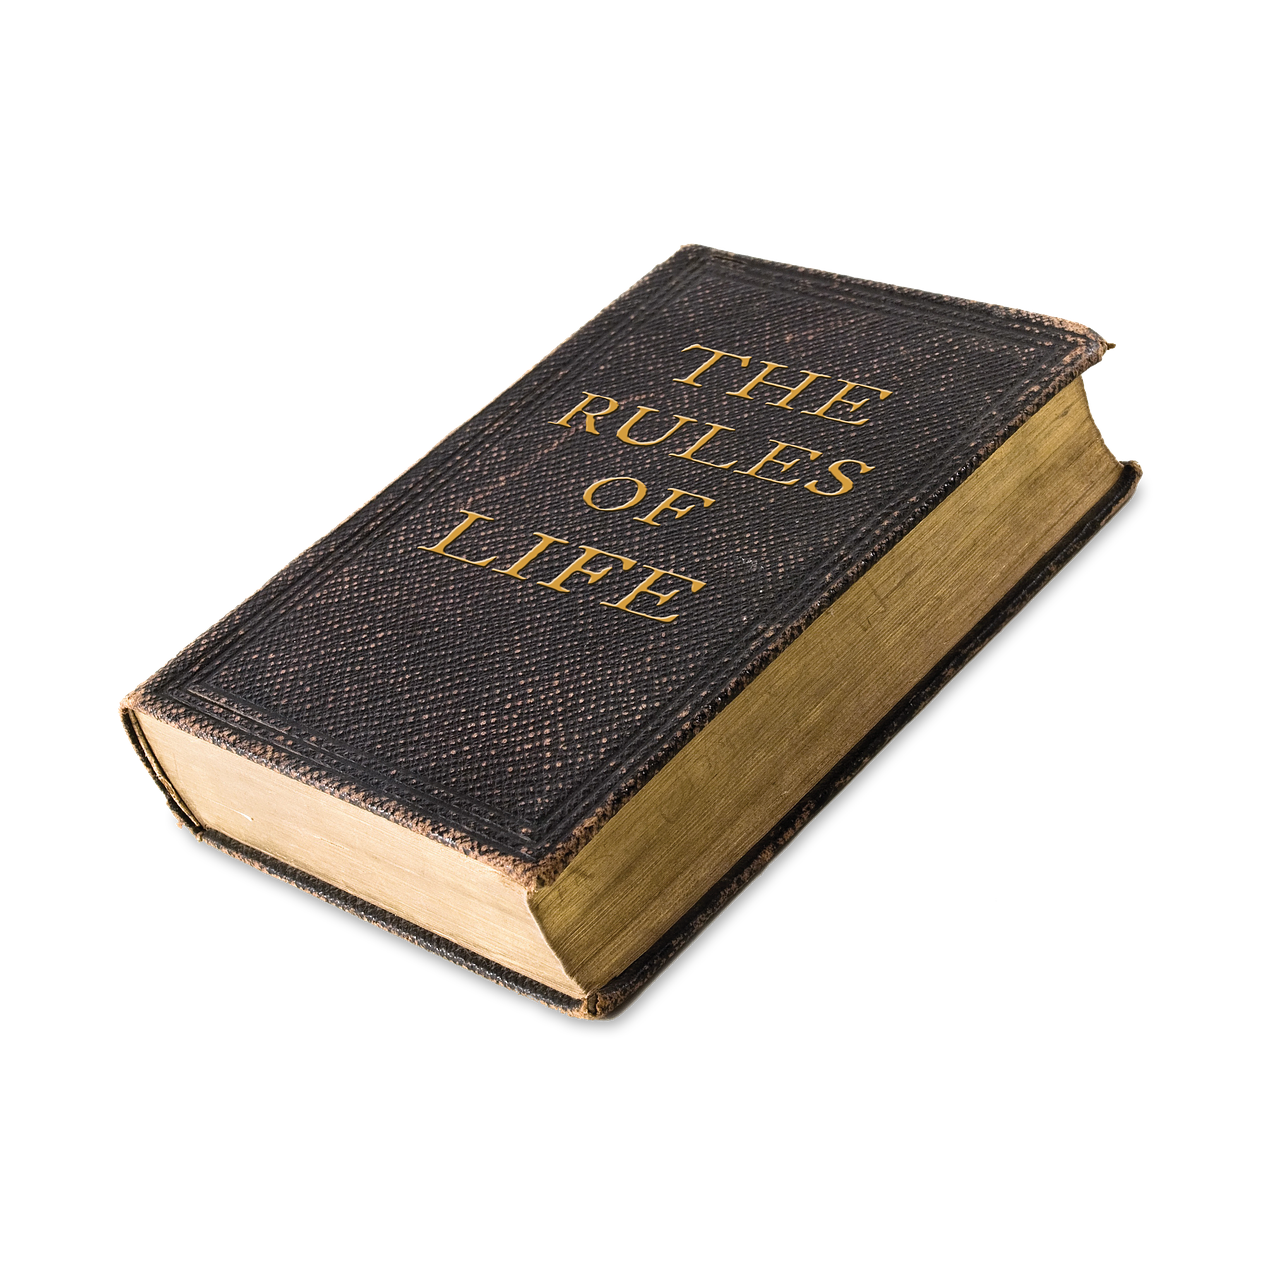 life rules book free photo